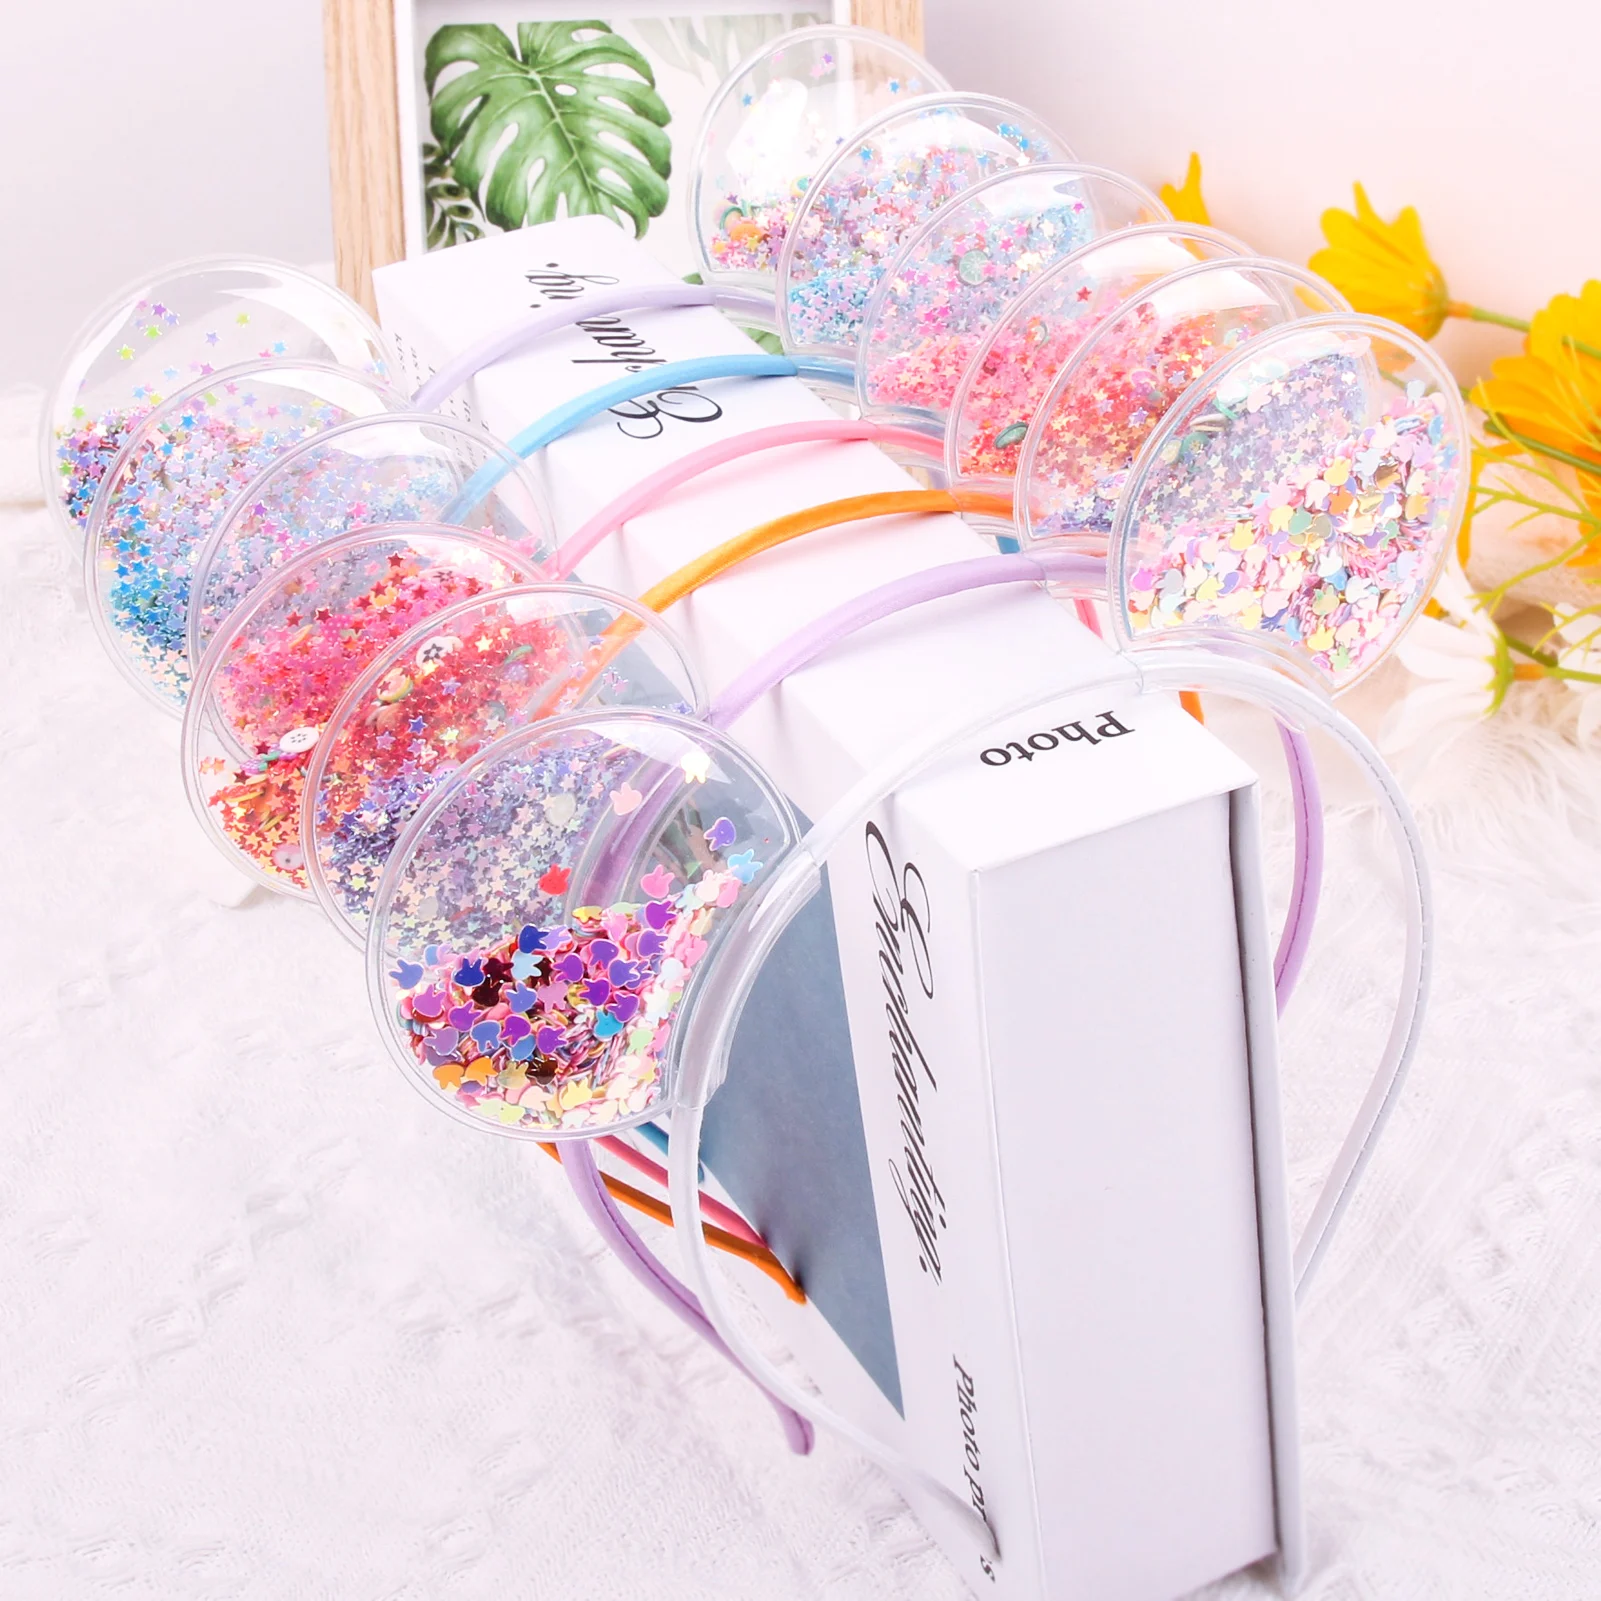 Candygirl Transparent Cat Ears Headband Quicksand Bows Hair Hoop Cute Colorful Sequins Hairbands Girls Princess Hair Accessories candygirl cute plastic colour headbands lovely cat ears princess hair bands for kids hair hoop birthday party hair accessories